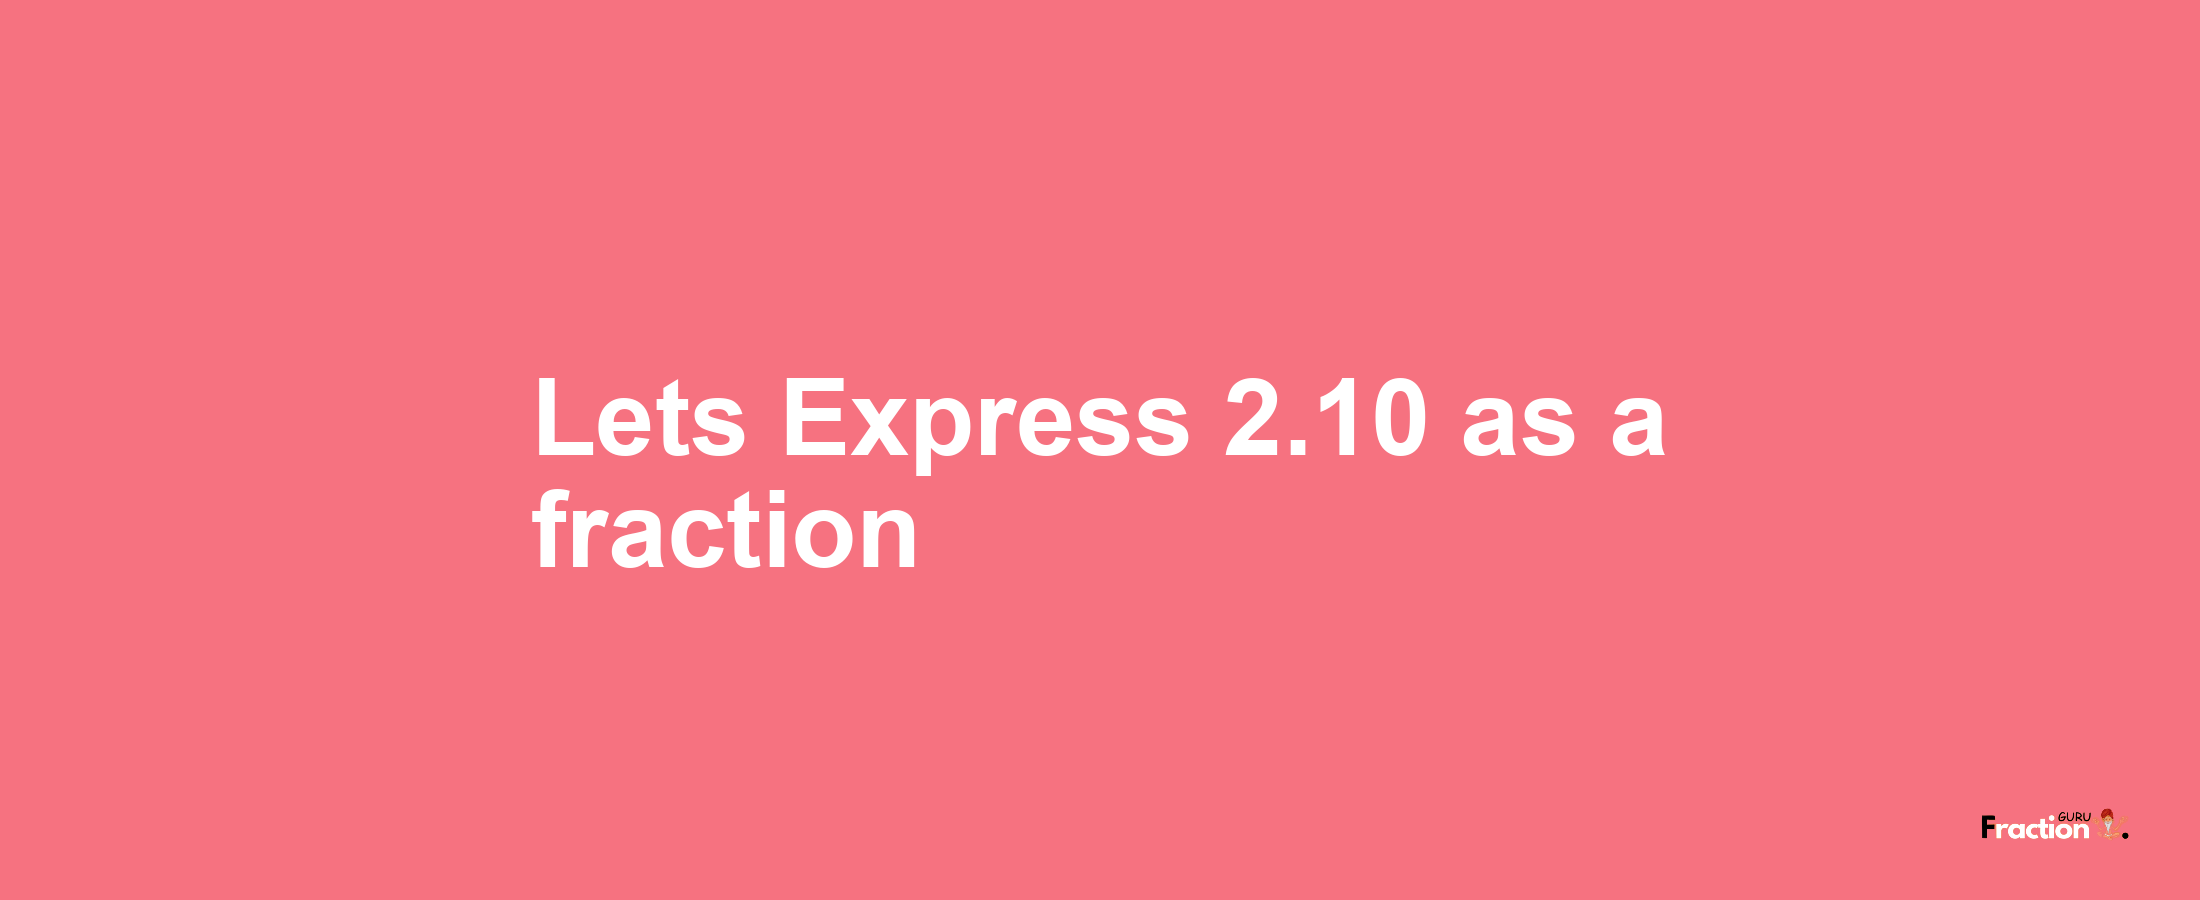 Lets Express 2.10 as afraction